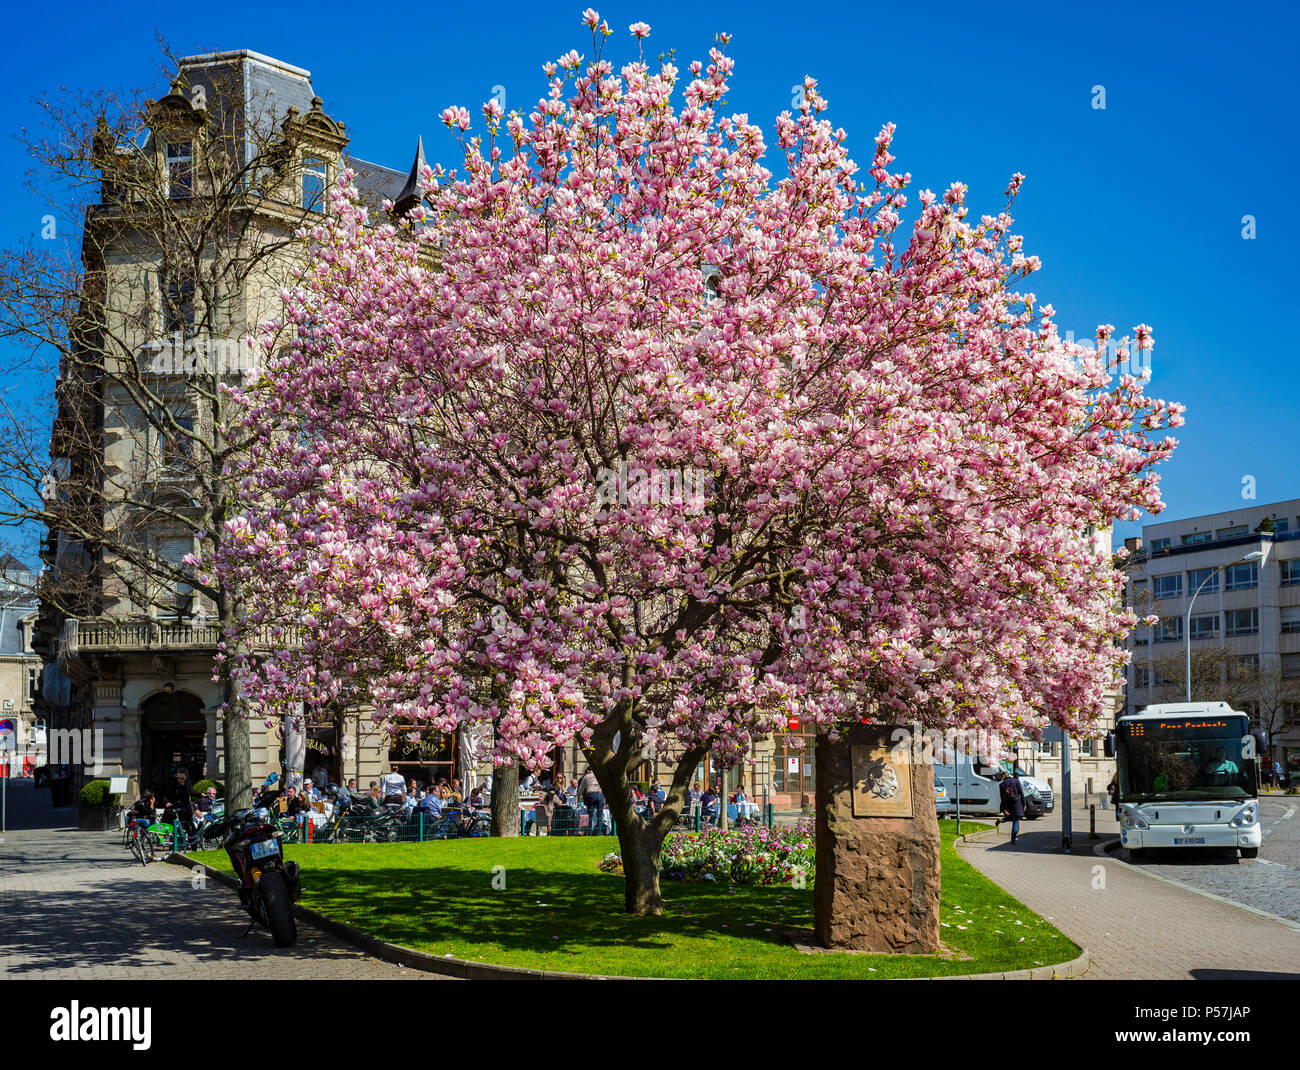 Strasbourg, Marcel Rudloff square with blooming magnolia tree and cafe Brant, Alsace, France, Europe, Stock Photo